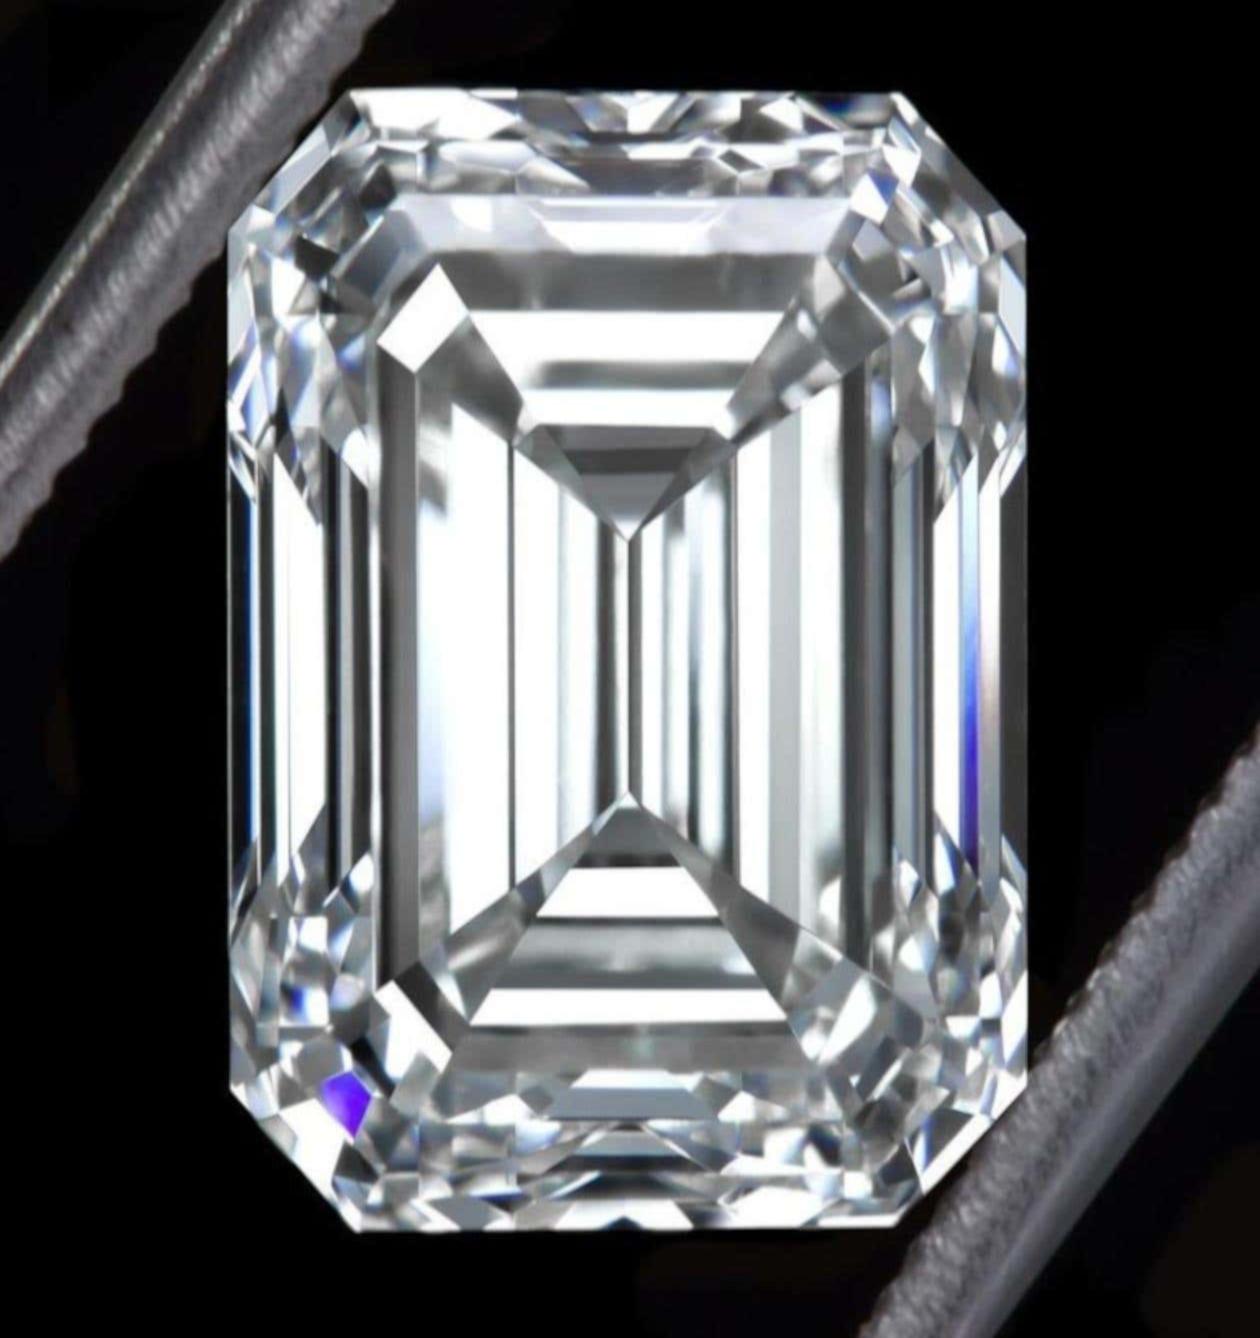 Fantastic 2.50 carat weight of Emerald cut diamond. 
The main stone weights 2.50 carats has been certified by GIA and is E in color and internally flawless in clarity